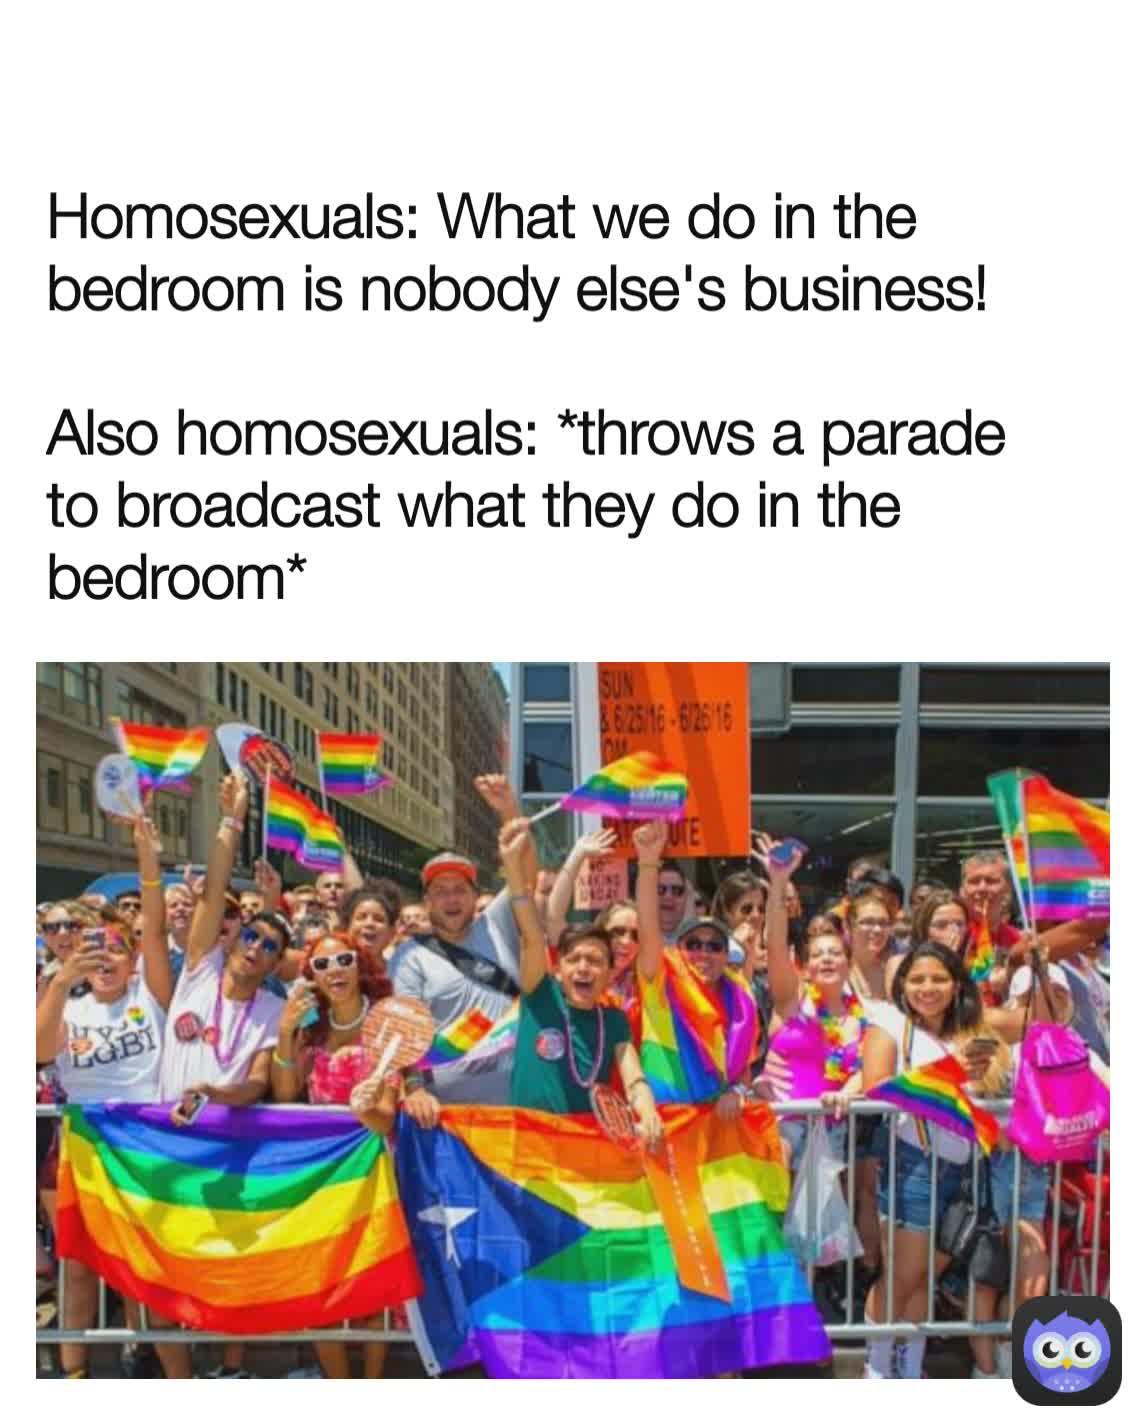 Homosexuals: What we do in the bedroom is nobody else's business! 

Also homosexuals: *throws a parade to broadcast what they do in the bedroom*